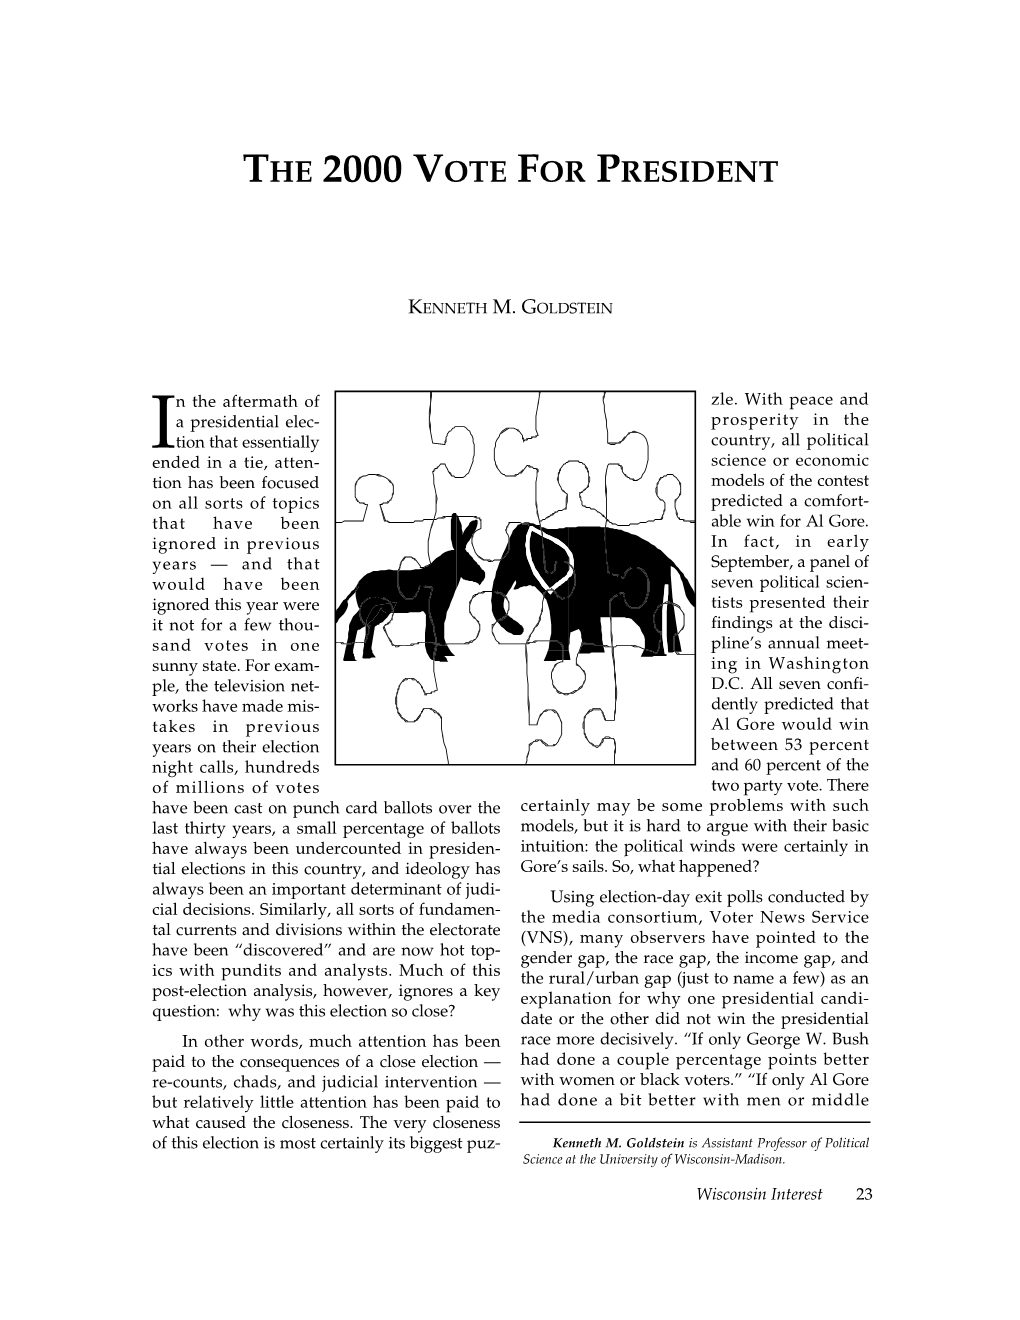 The 2000 Vote for President